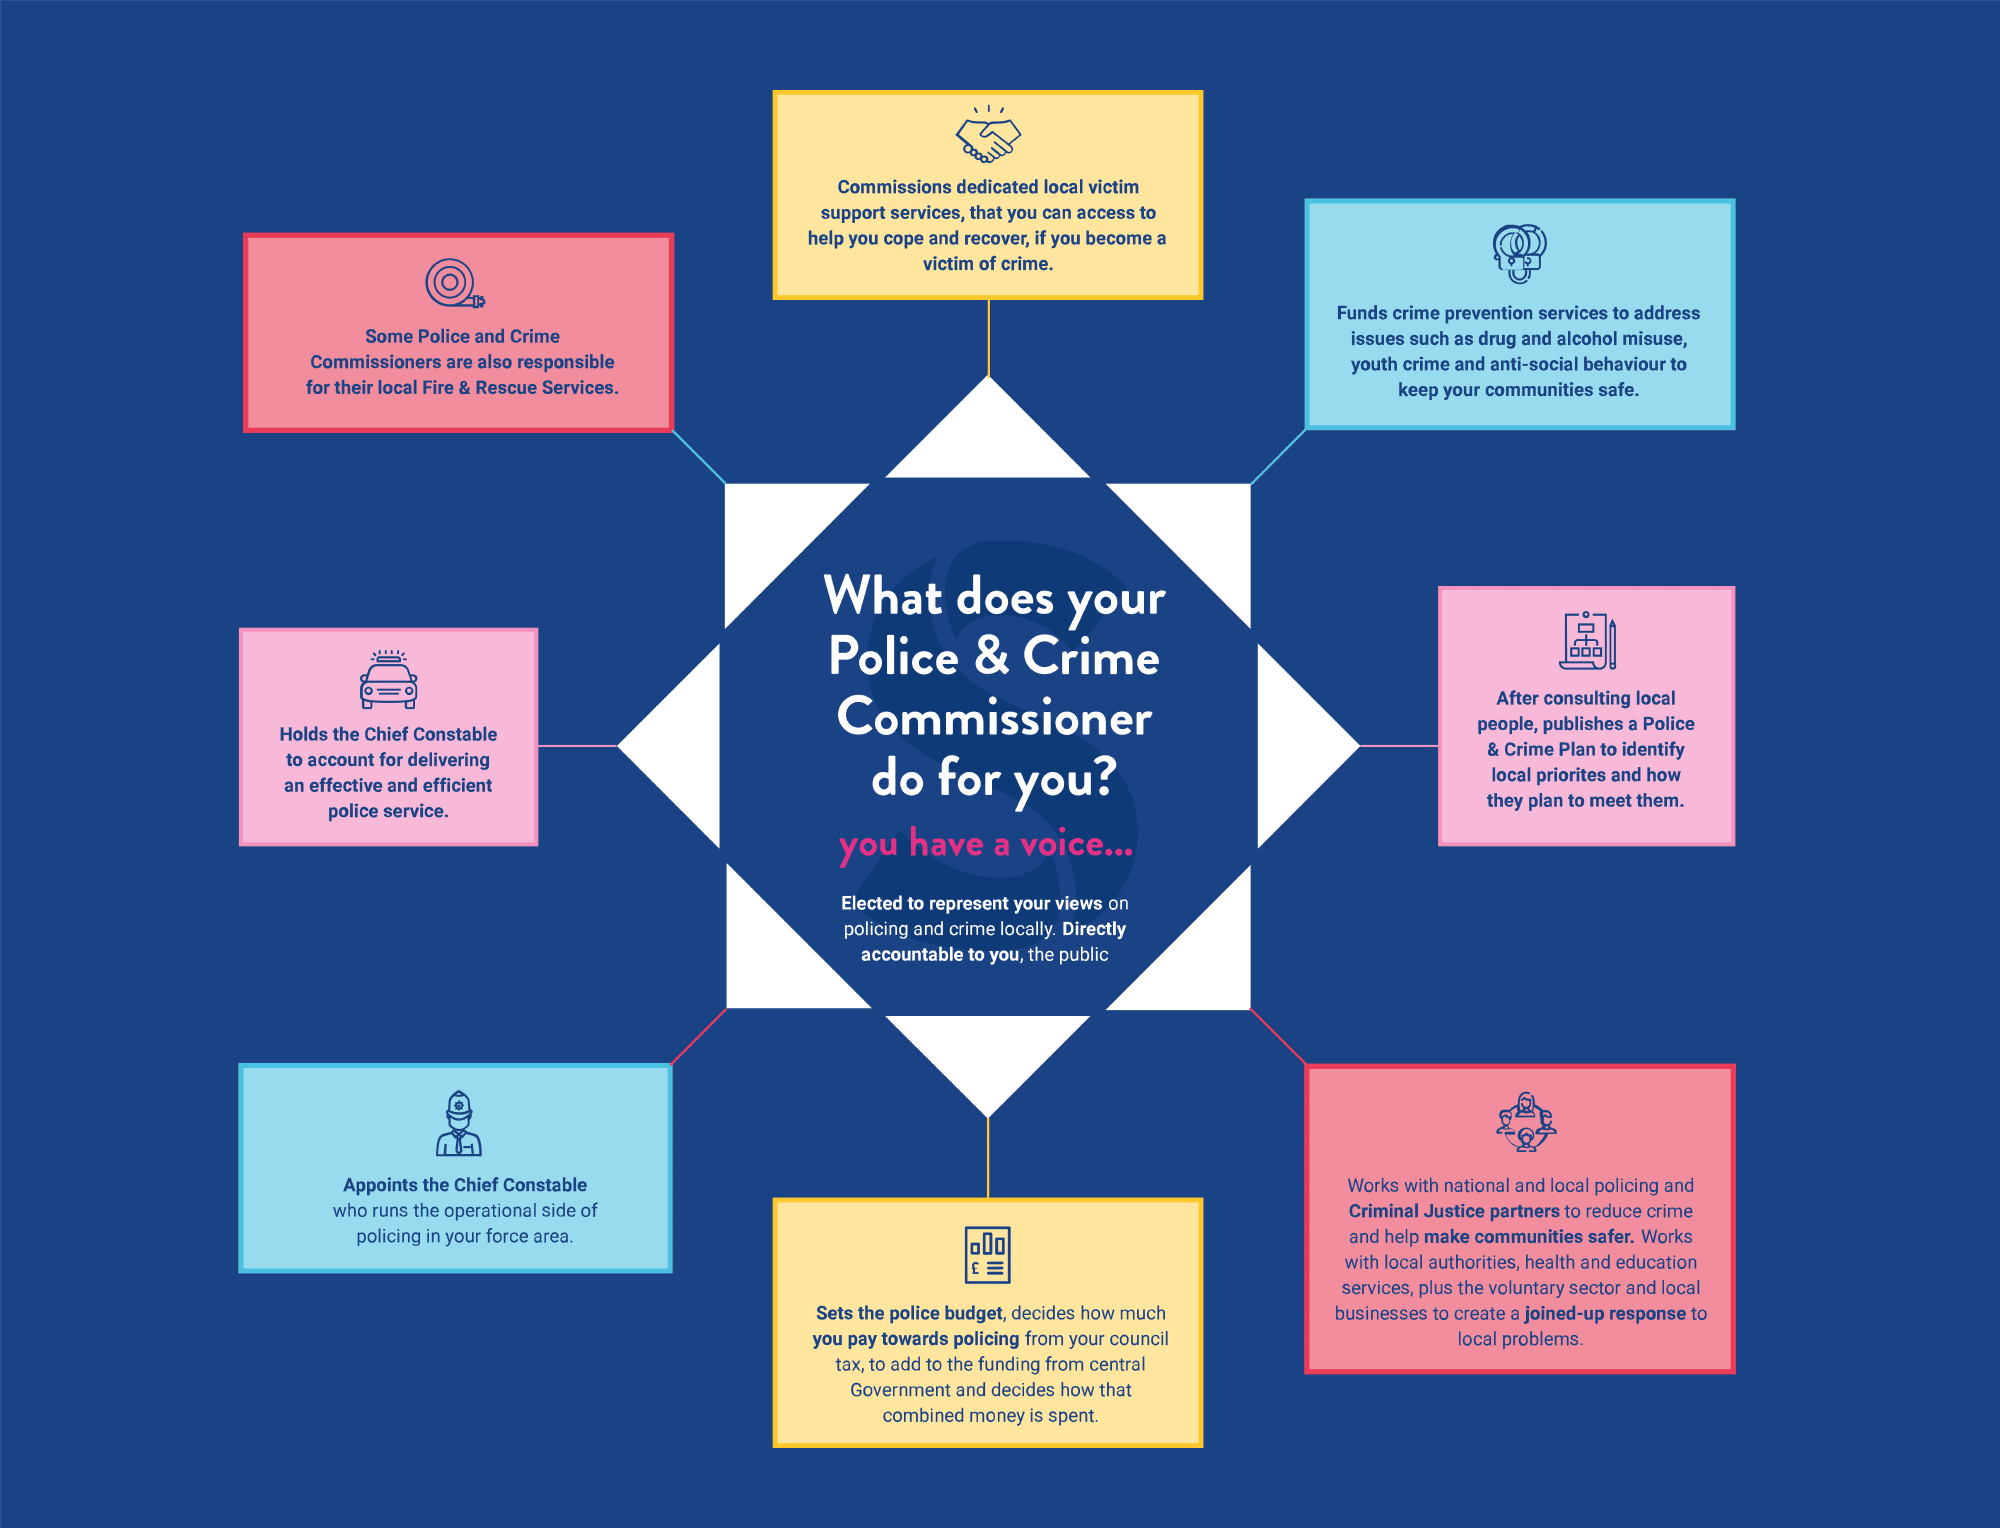 Commissioner's roles and responsibilities